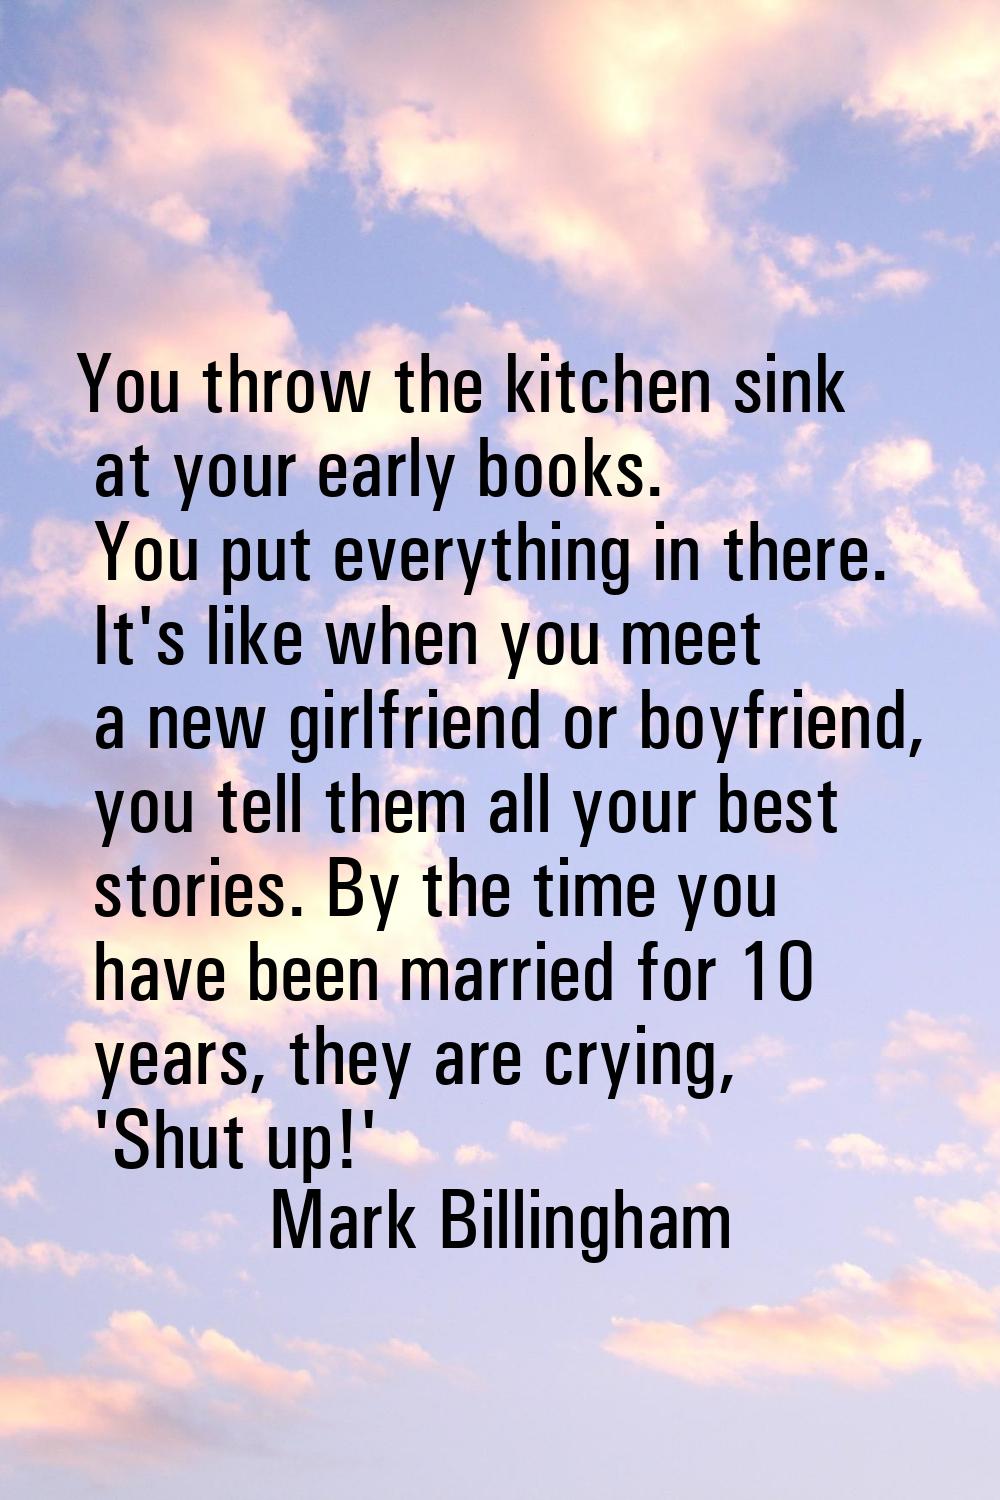 You throw the kitchen sink at your early books. You put everything in there. It's like when you mee